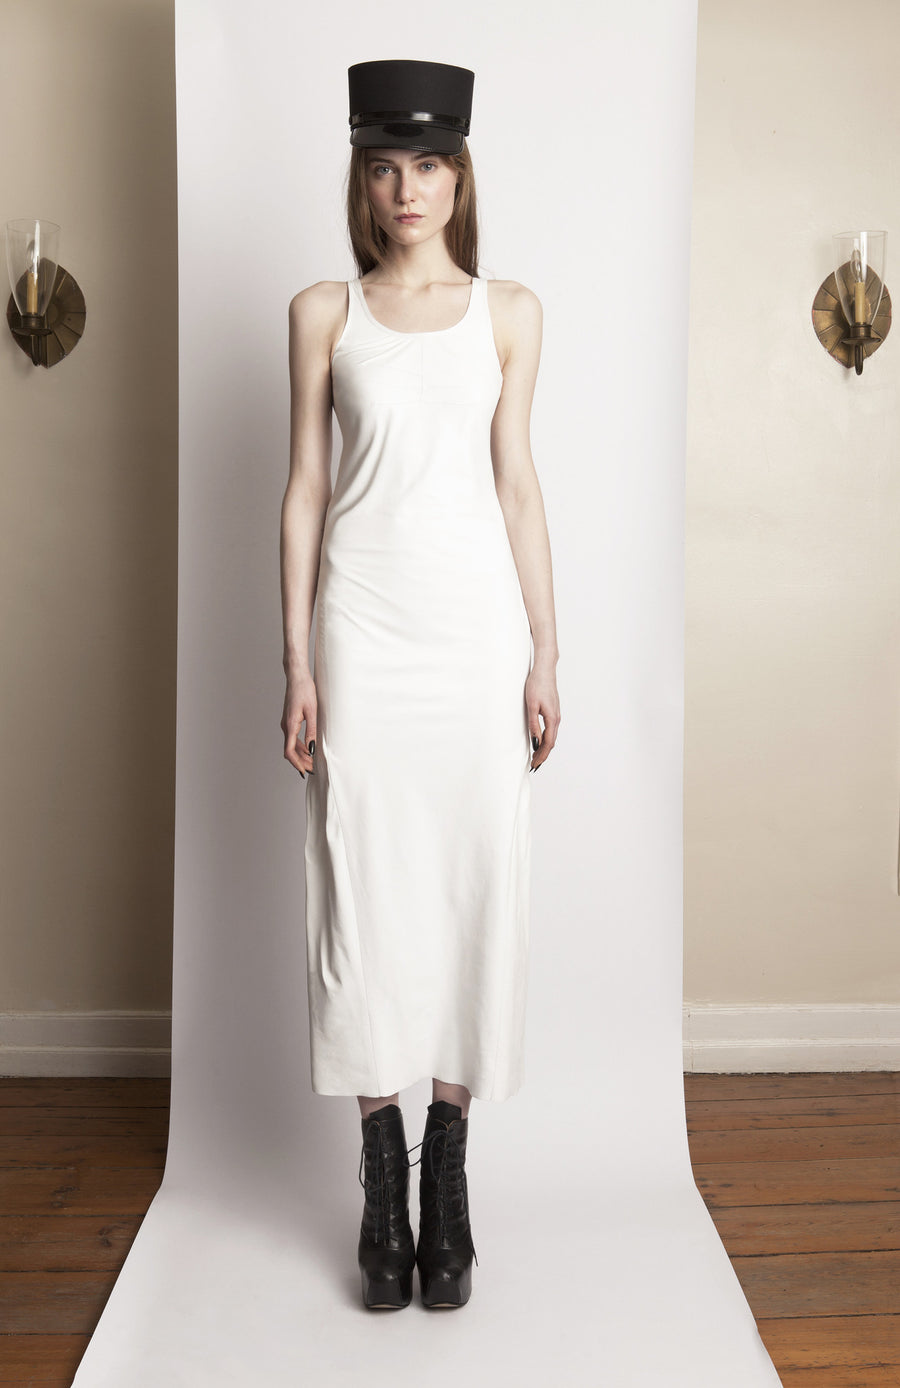 Basia IMG Model Wendy Nicol Clothing Fashion Designer Ready to Wear Fashion Runway Show AW13 Witch Lessons Fall Winter White Plonge Soft Tight Leather Tank Fitted Slip Dress Handmade in NYC new york city Custom Tailoring Fitting Size Fabric Color Made to Measure White witch bridesmaid dress